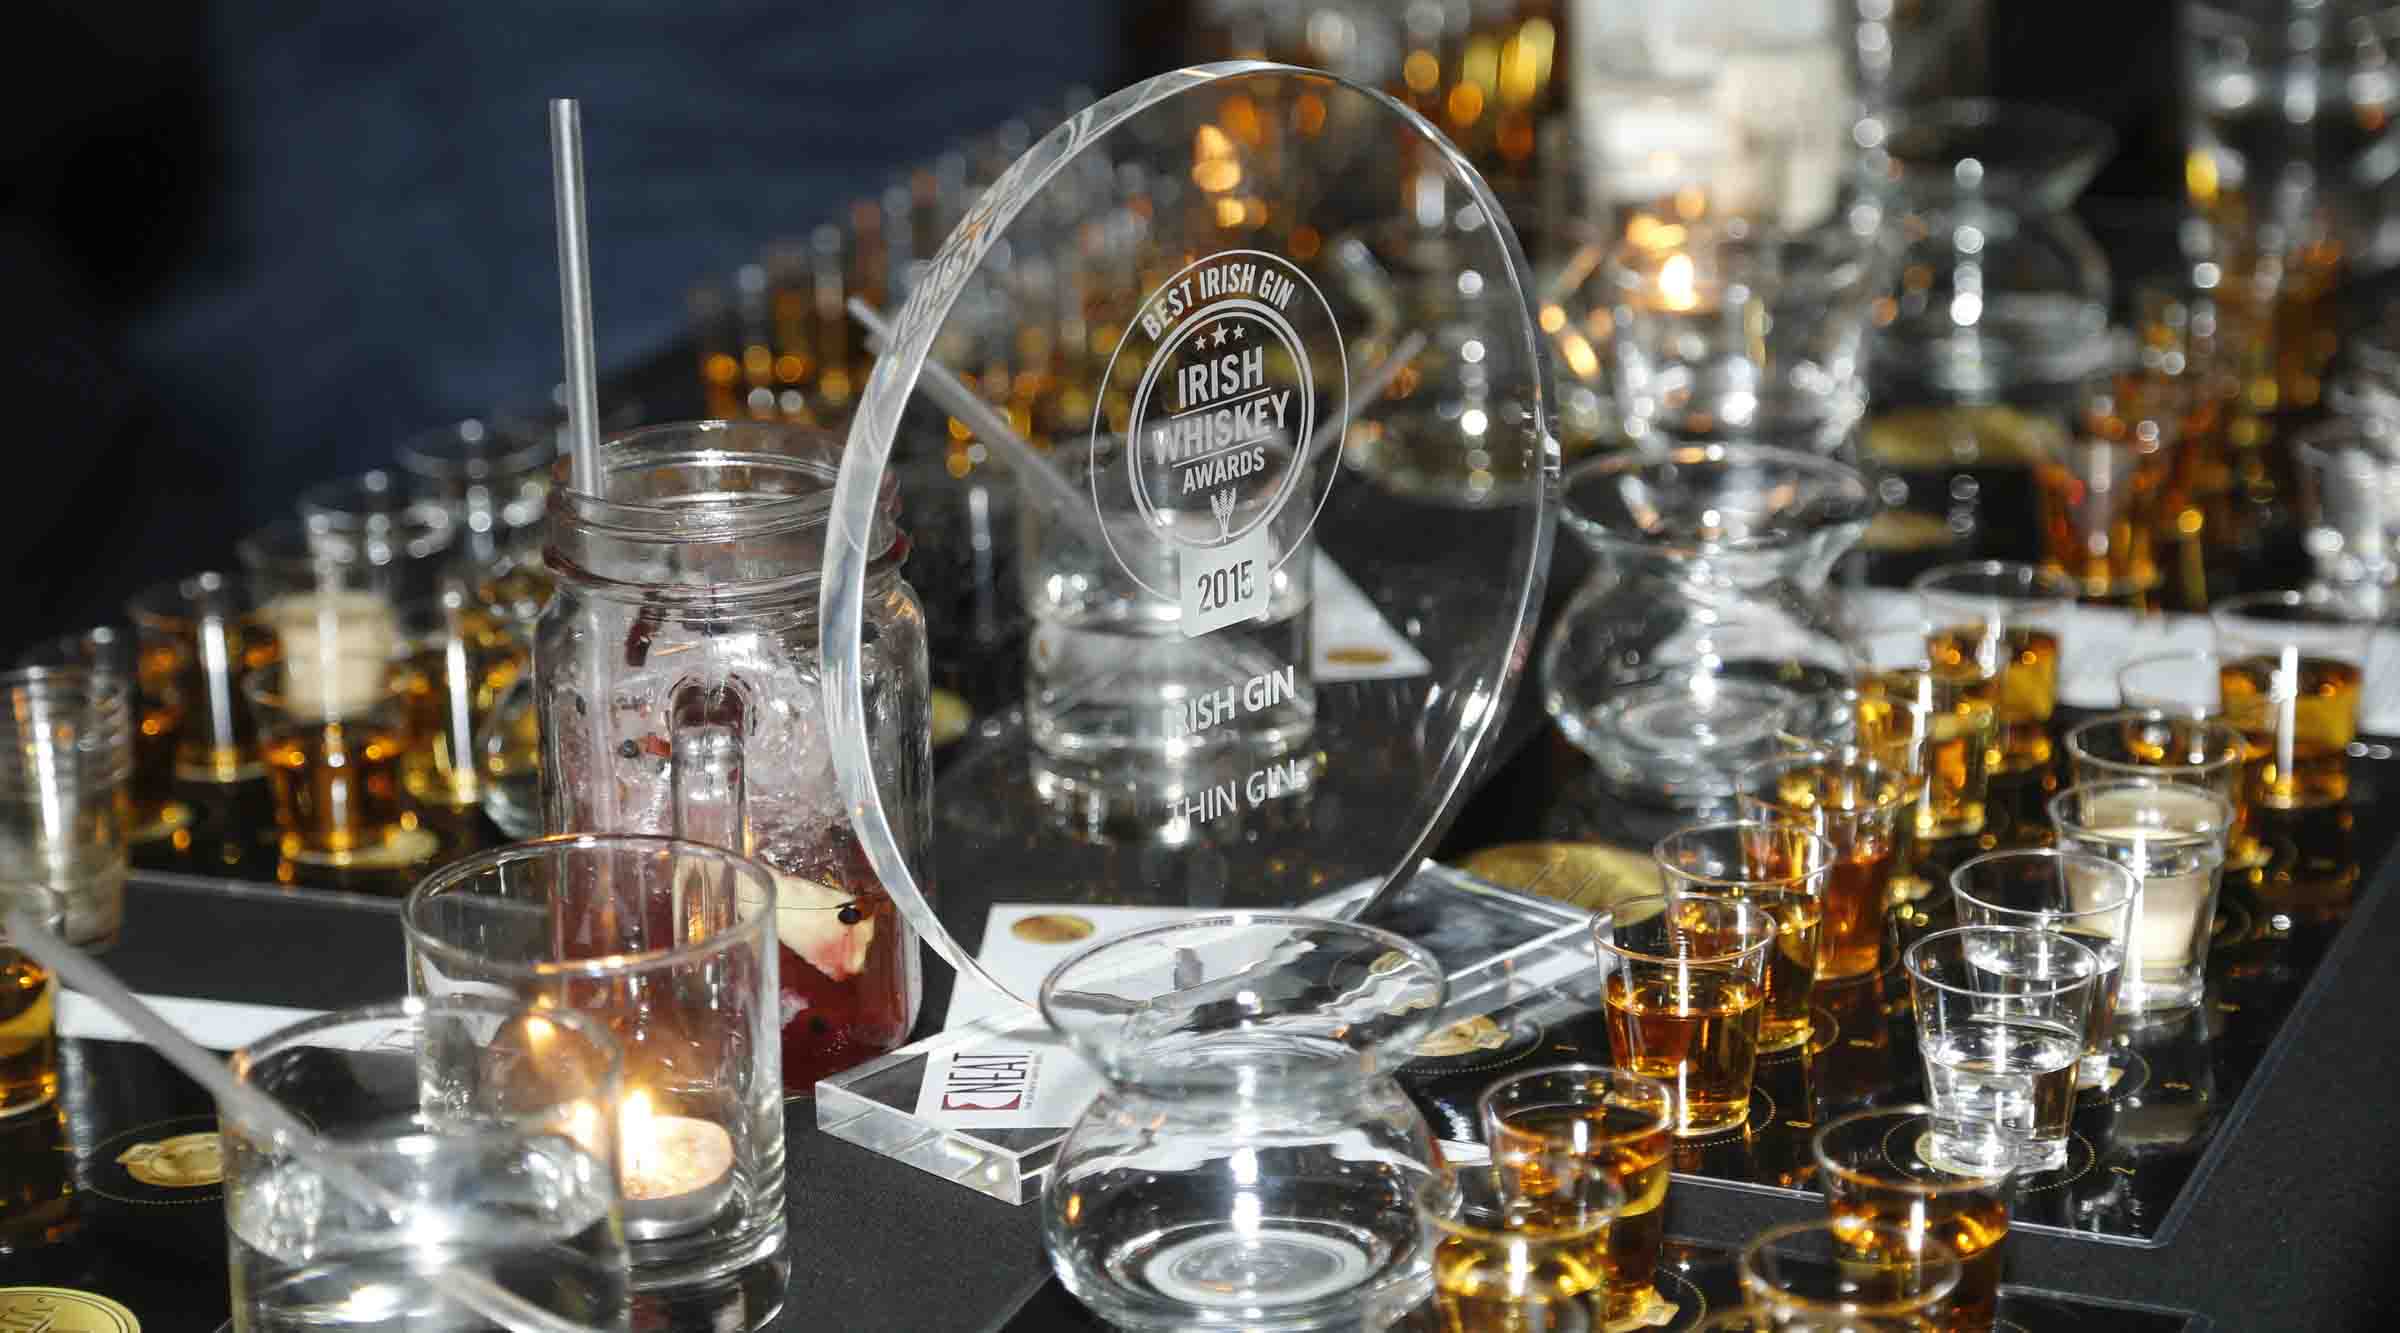 This is the fourth year of the awards which began in 2013 and now span some 20 categories of Irish spirits which makes it one of the biggest celebrations of Irish whiskey in the world.